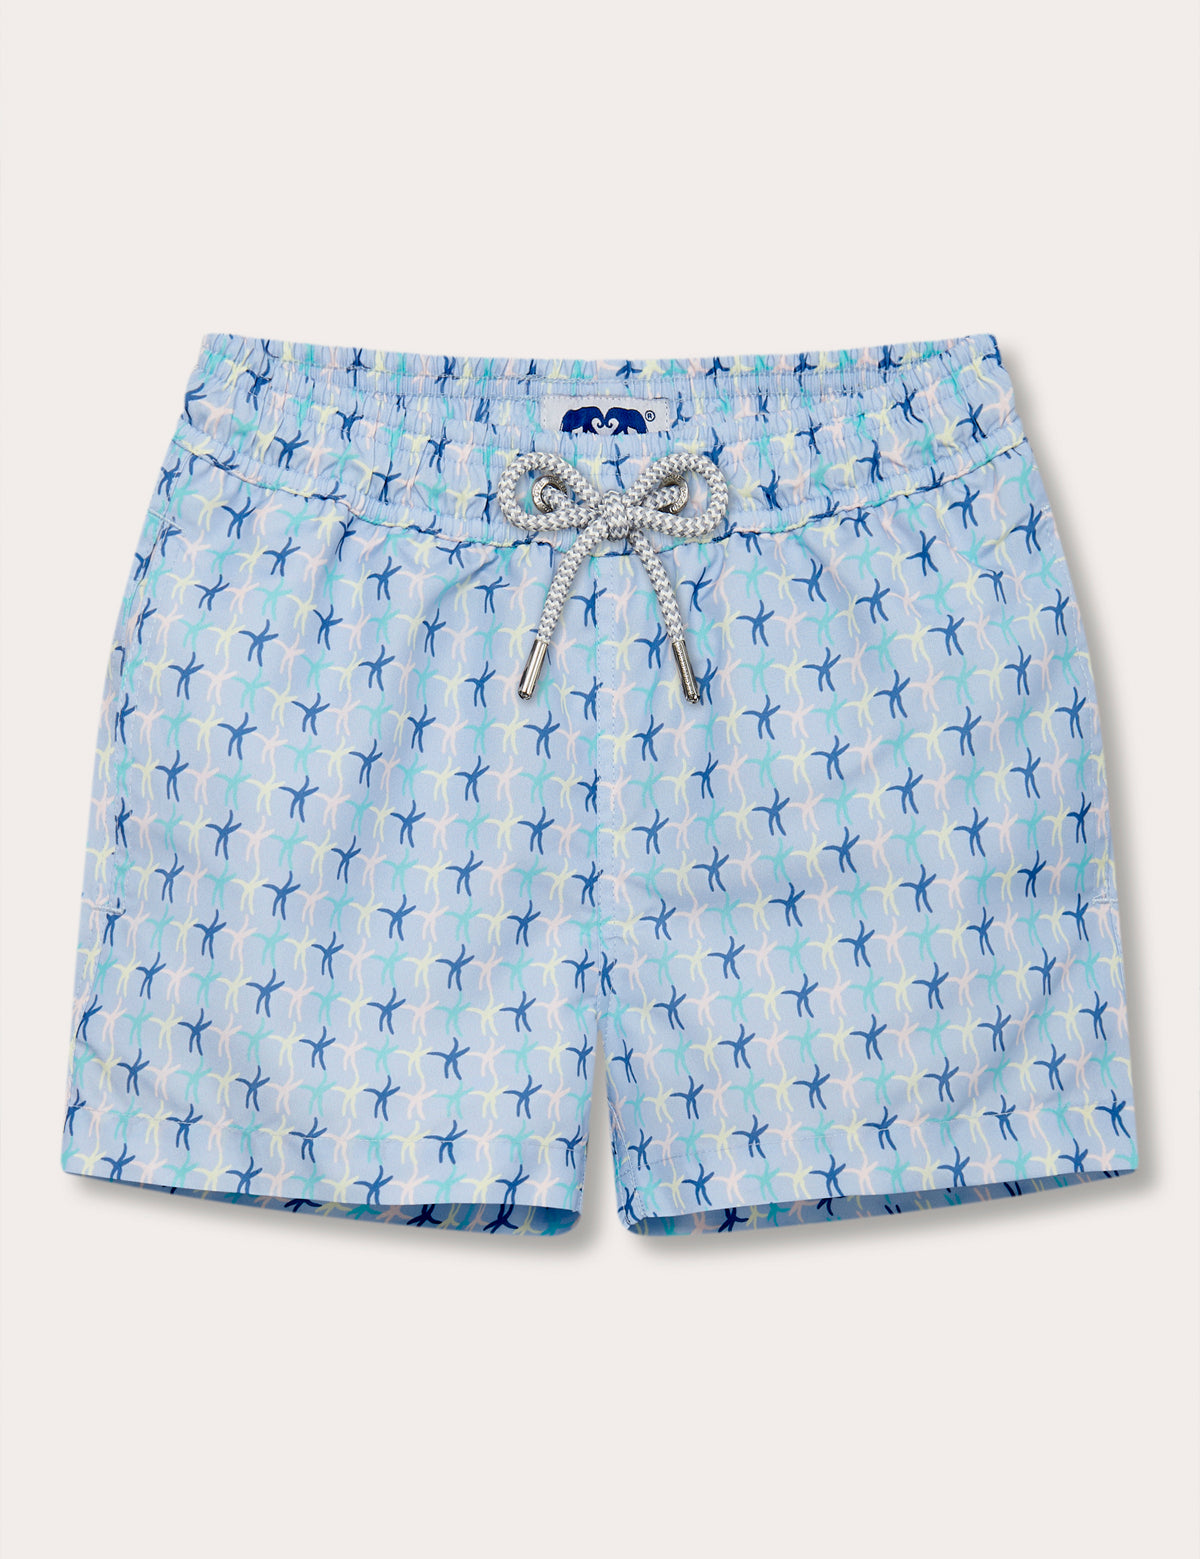 Boys Star Dancer Staniel Swim Shorts featuring playful sea star print in pastel pink, limoncello, cay green, and ocean blue on quick-drying, recycled fabric.